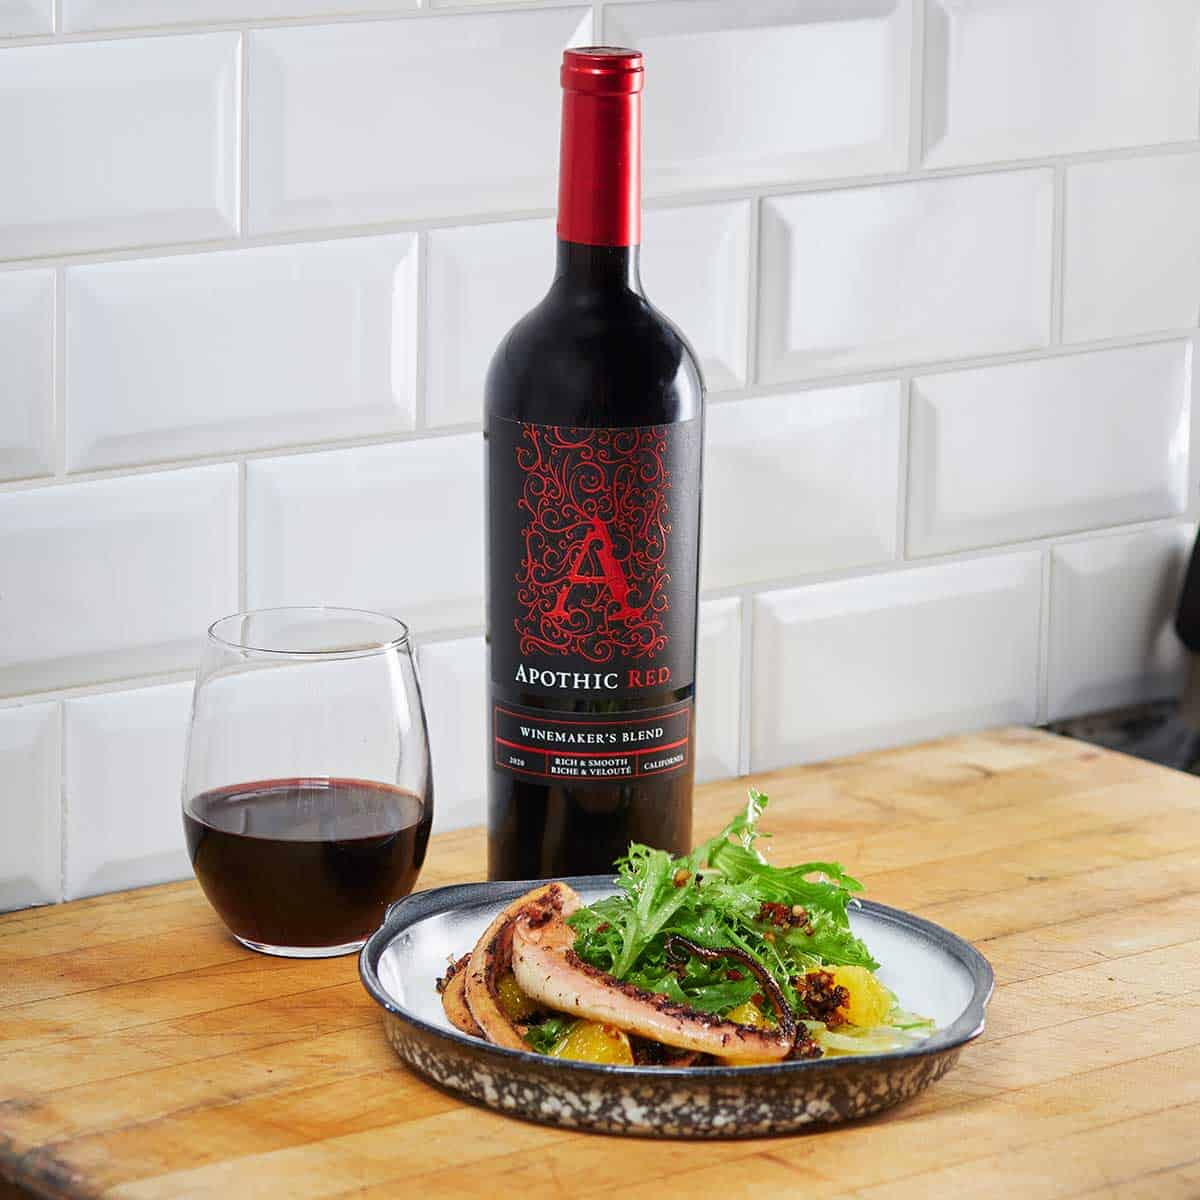 An octopus salad plate in front of a glass and a bottle of Apothic Red